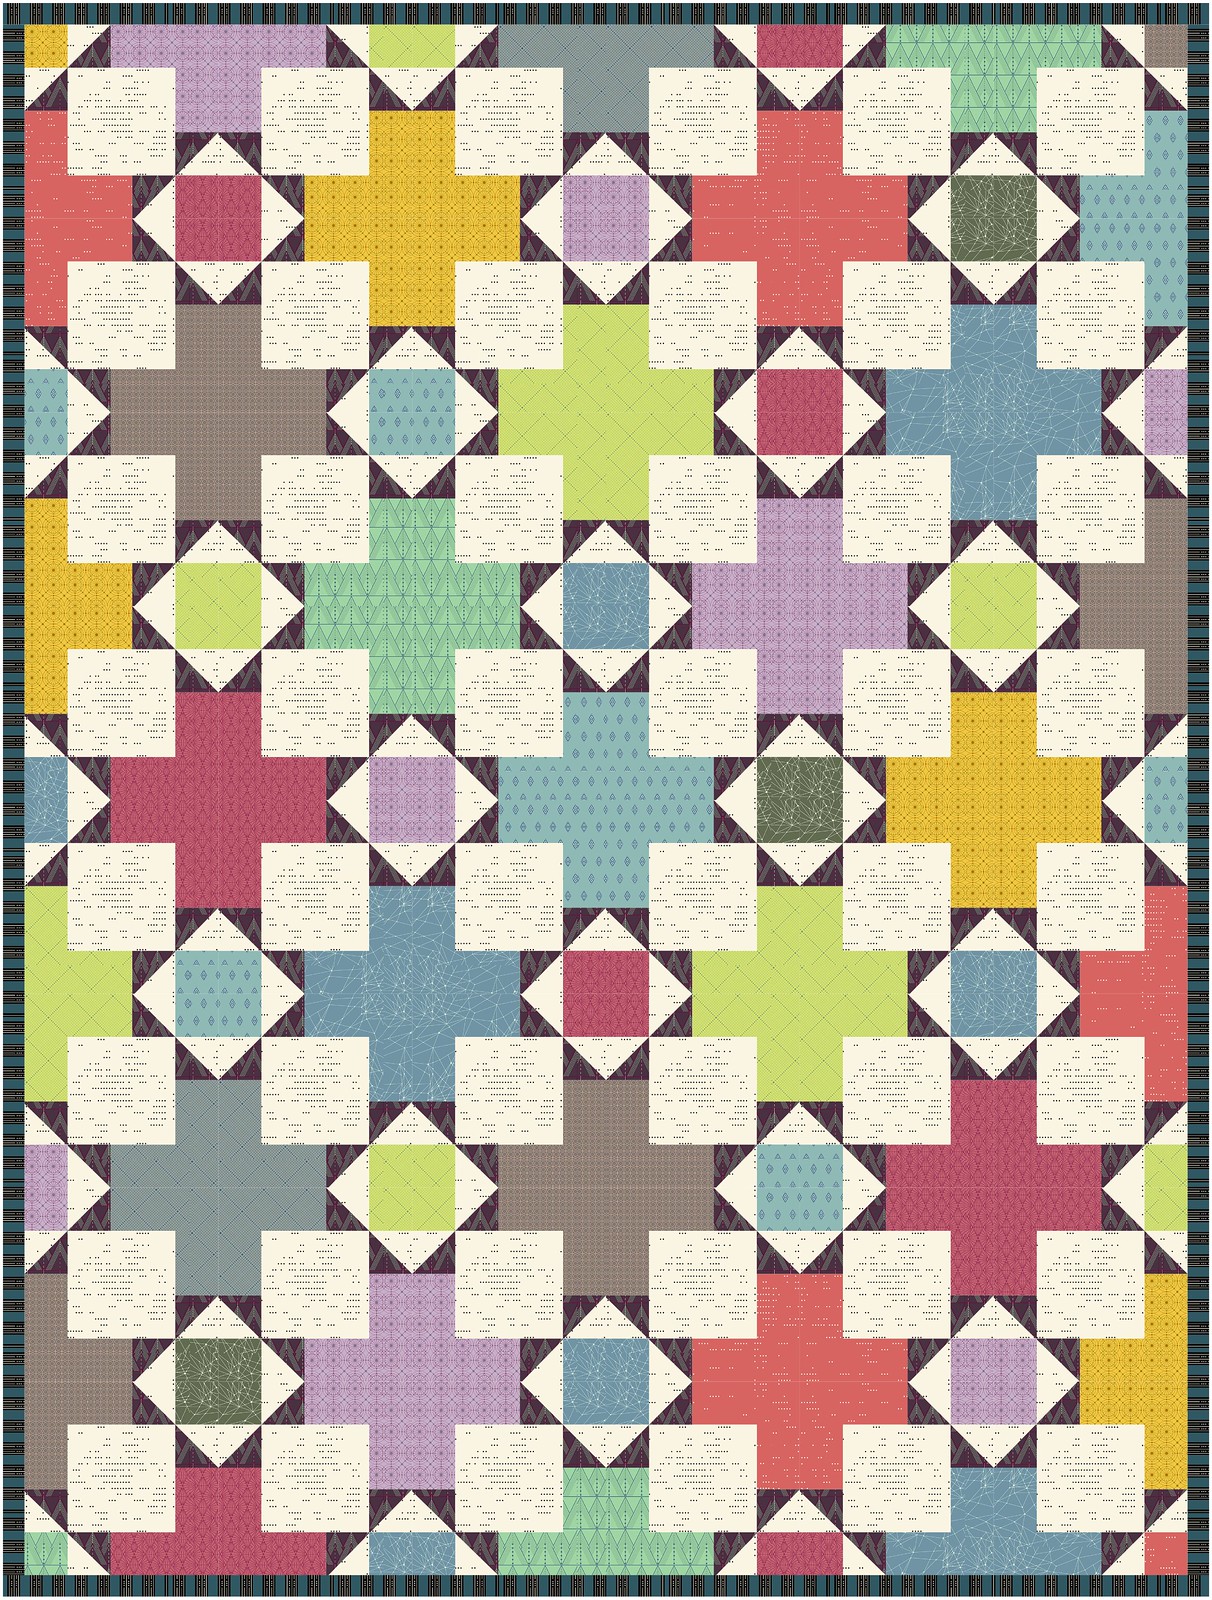 The Hazel Quilt in Fabric from the Attic